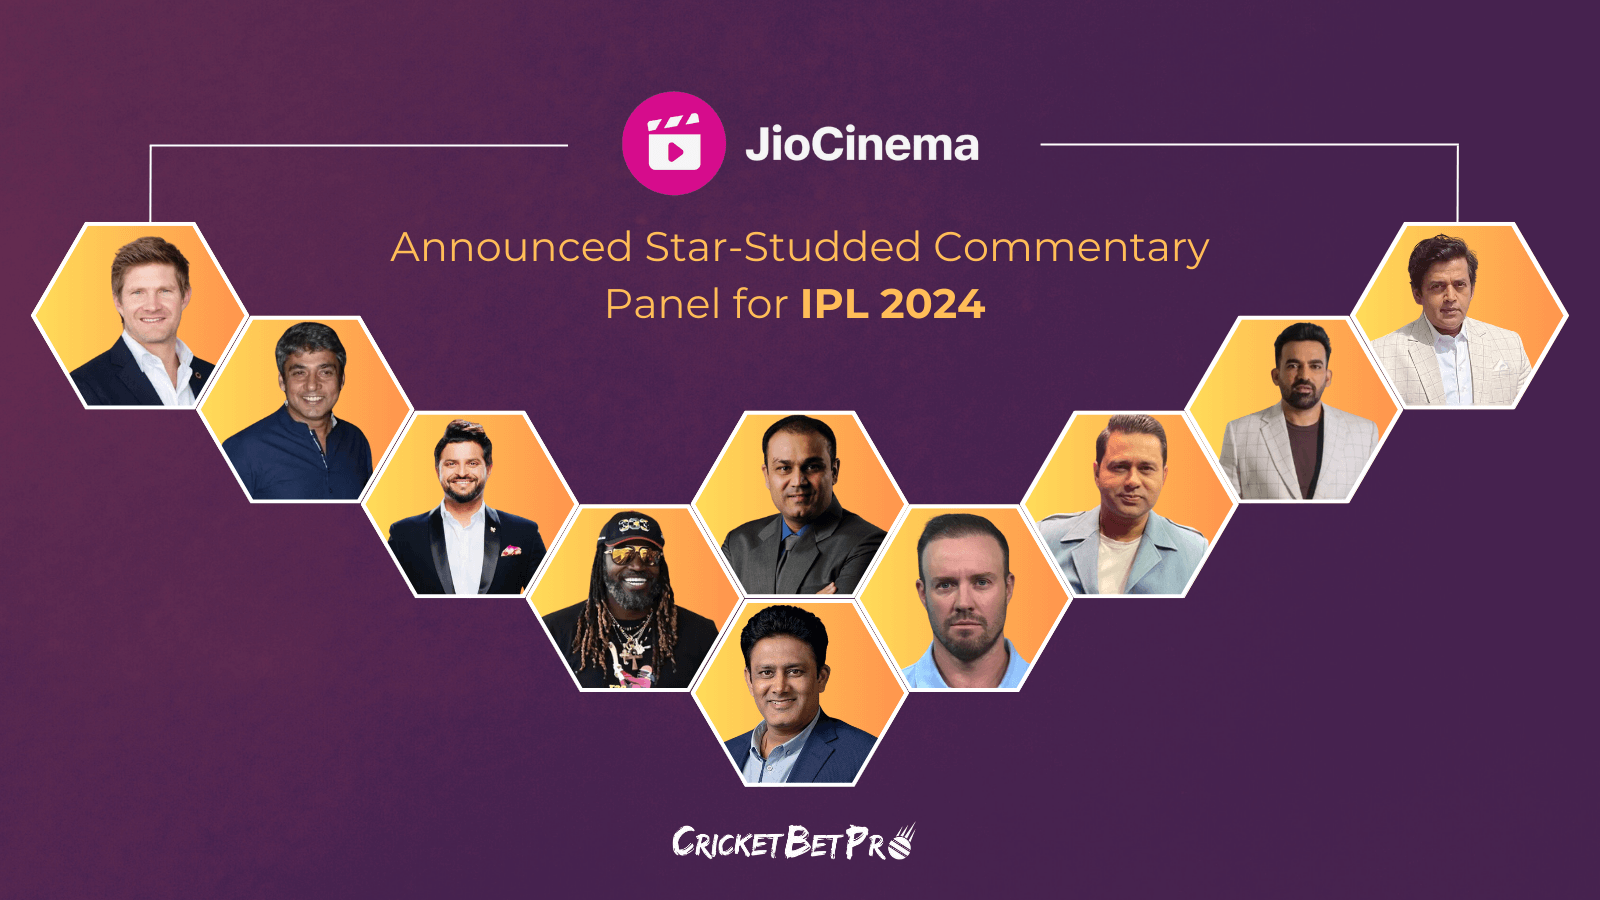 Jio Cinema Announced Star-Studded Commentary Panel for IPL 2024